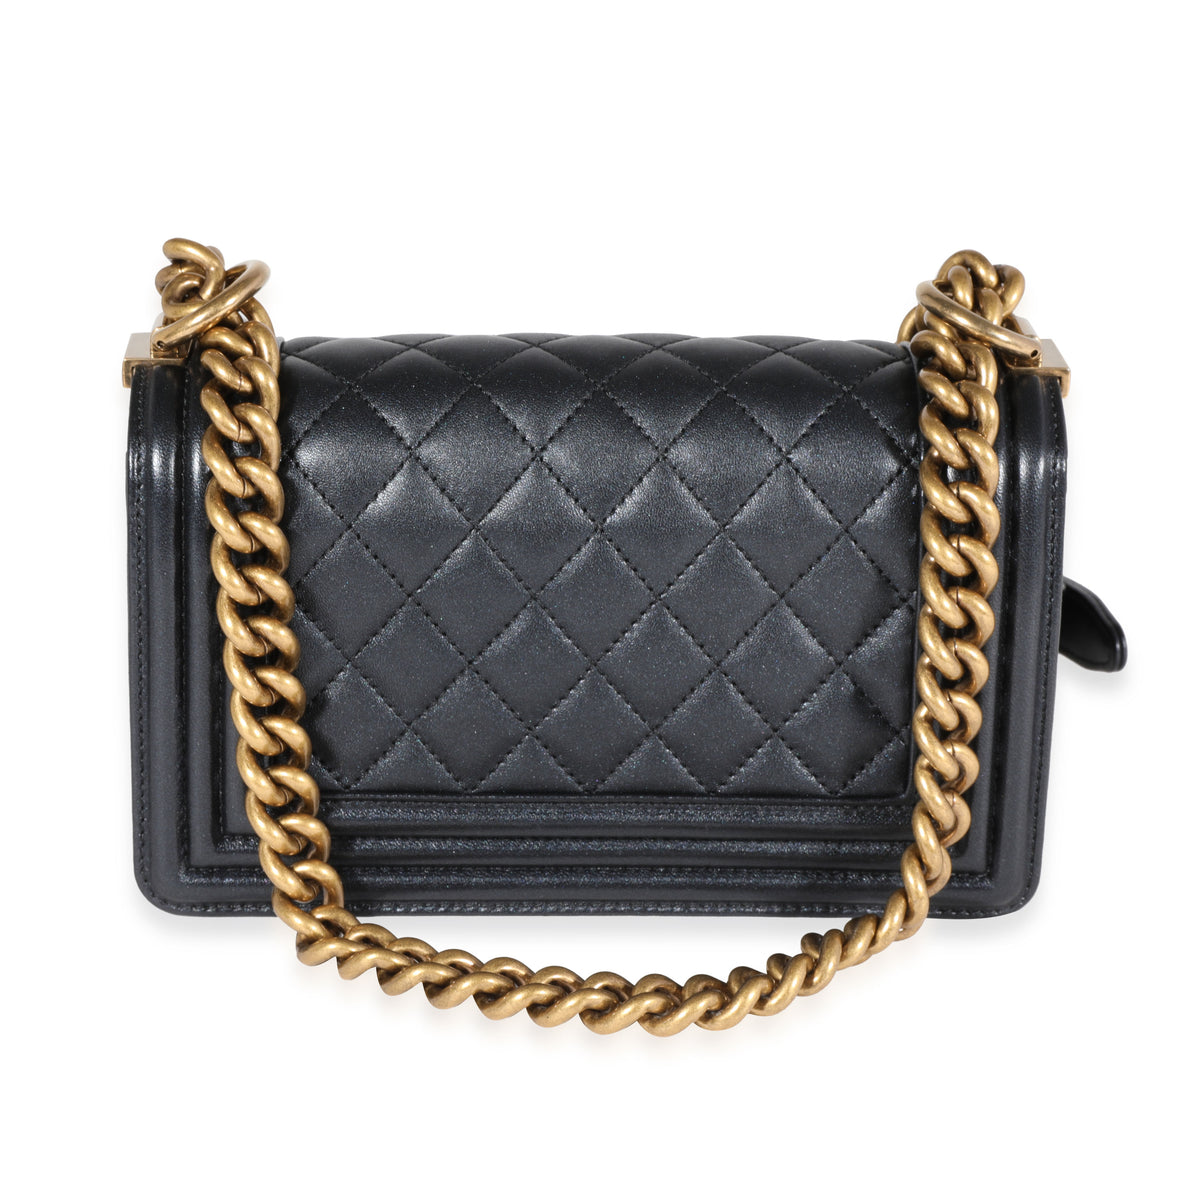 Chanel Black Quilted Lambskin Small Boy Bag